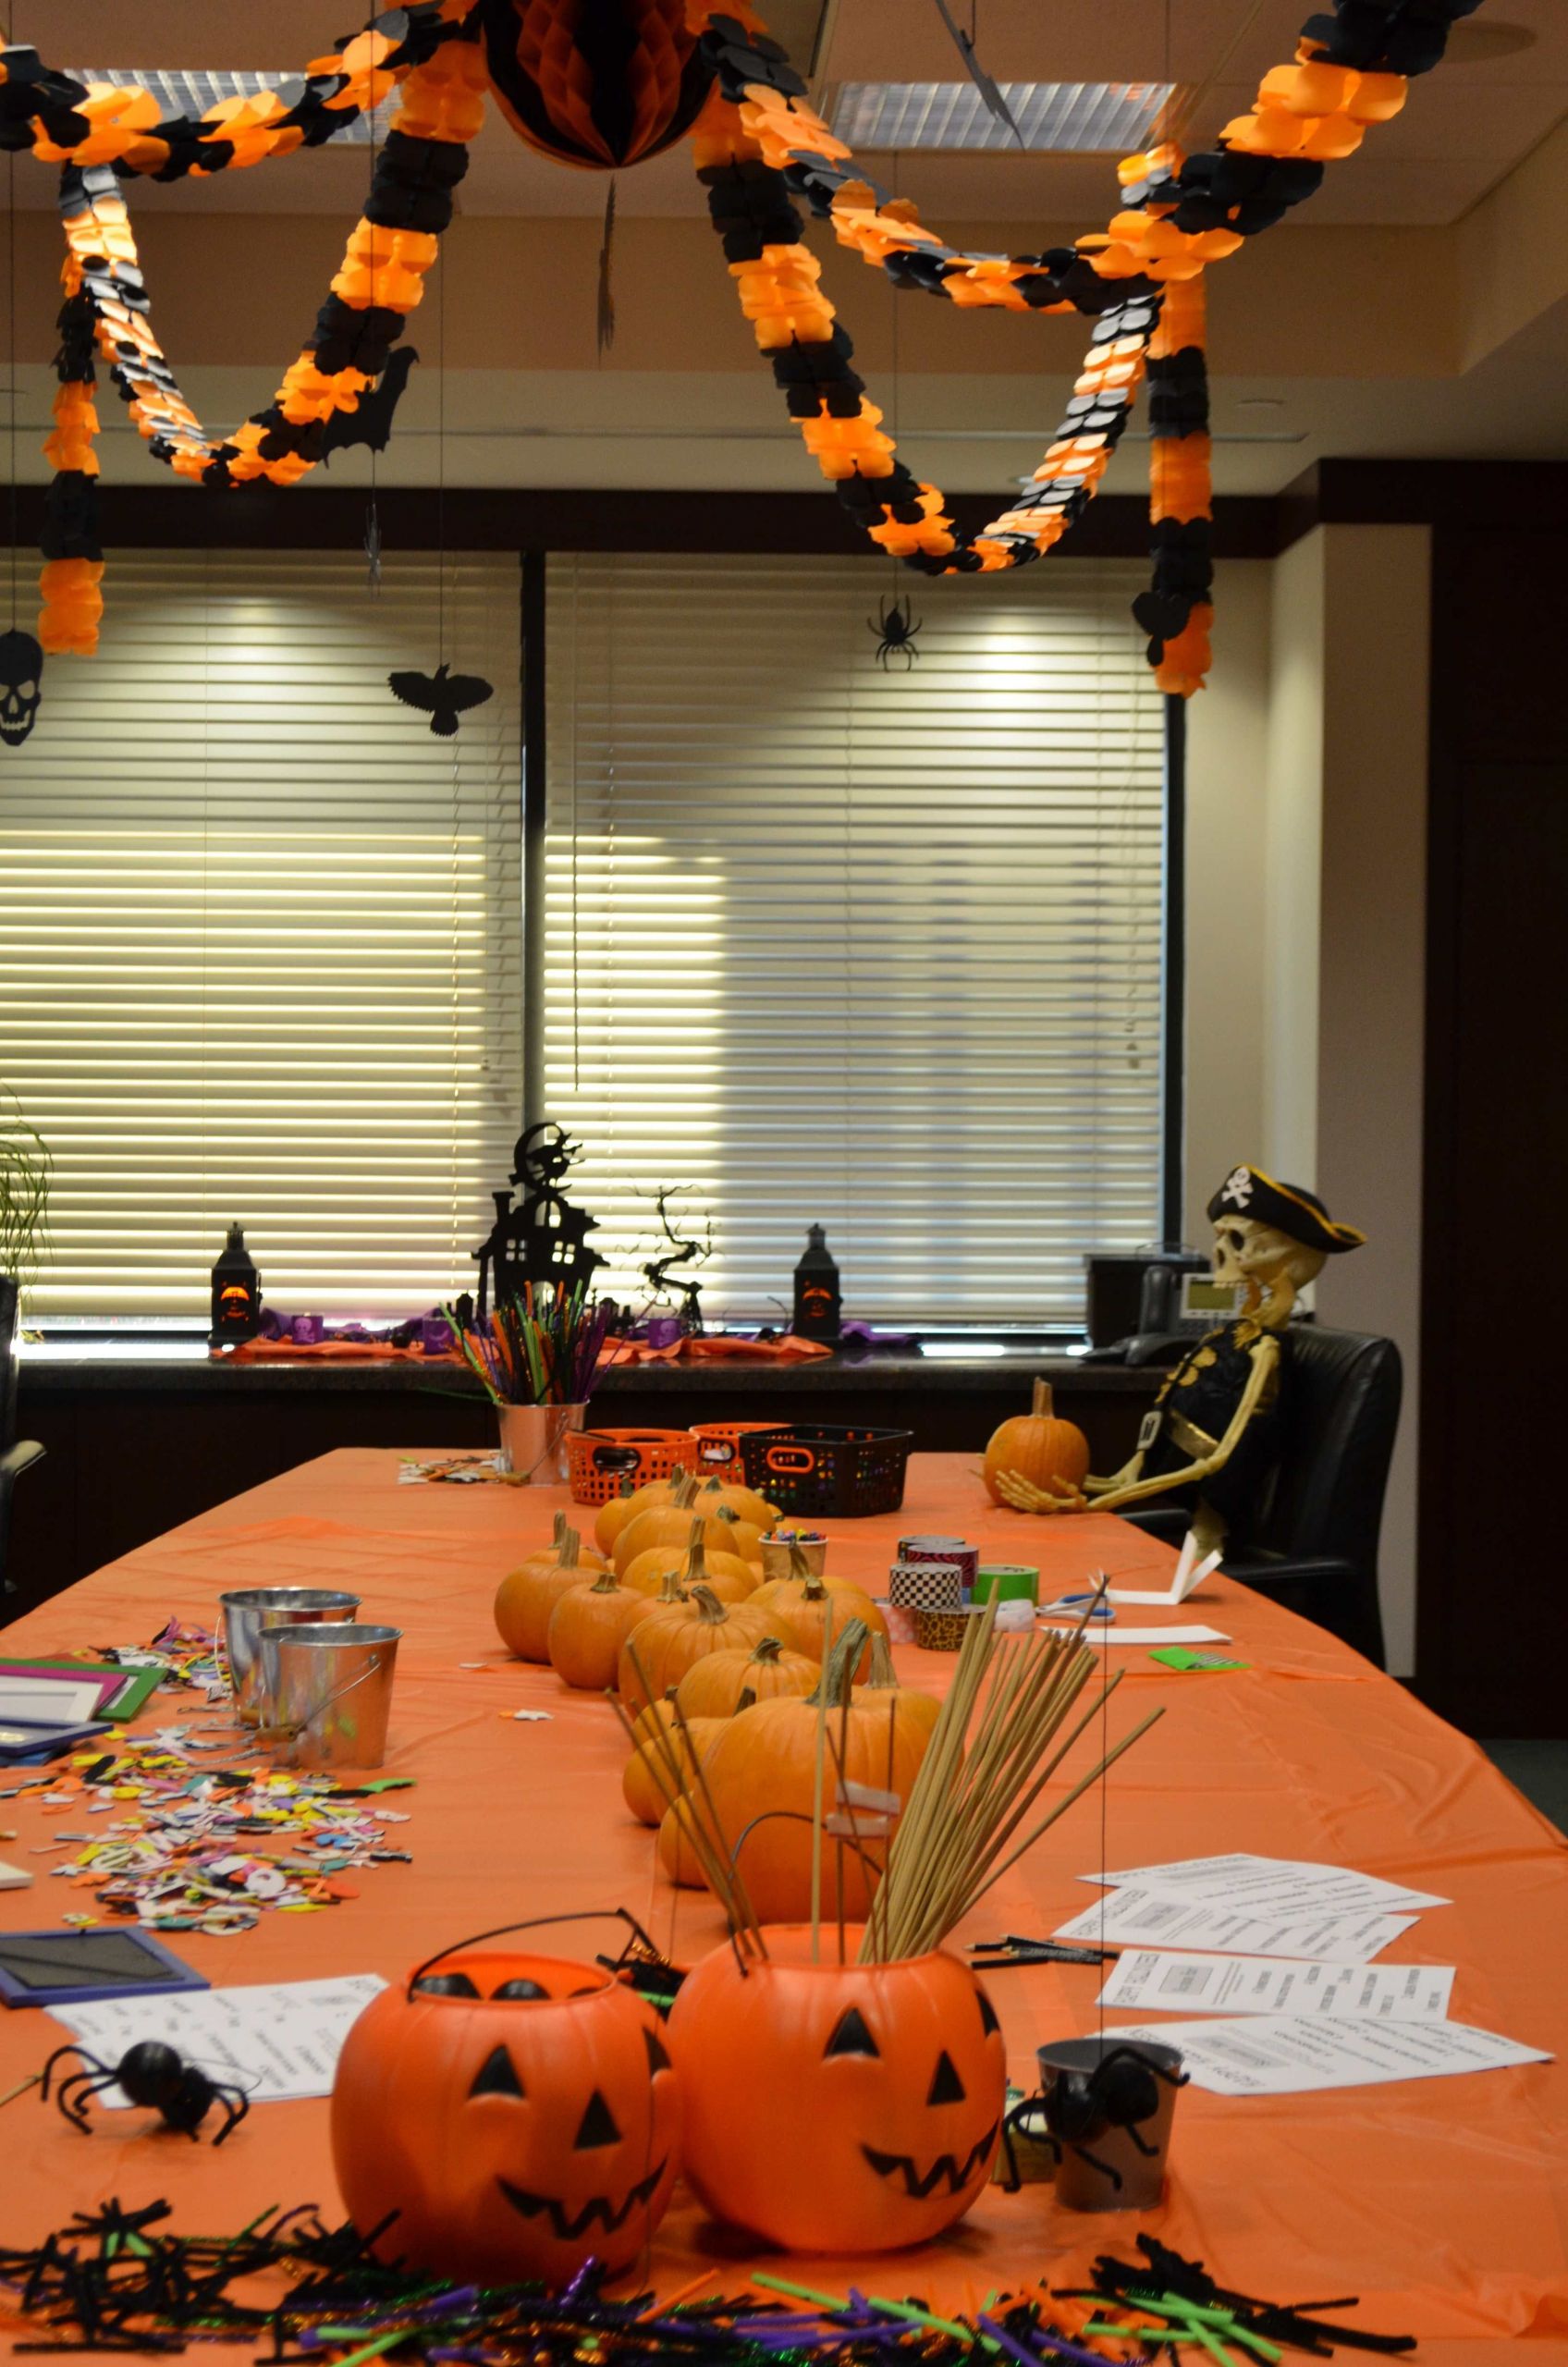 Halloween Decoration Ideas For Party
 Halloween decorations for an office by kidsposhparties